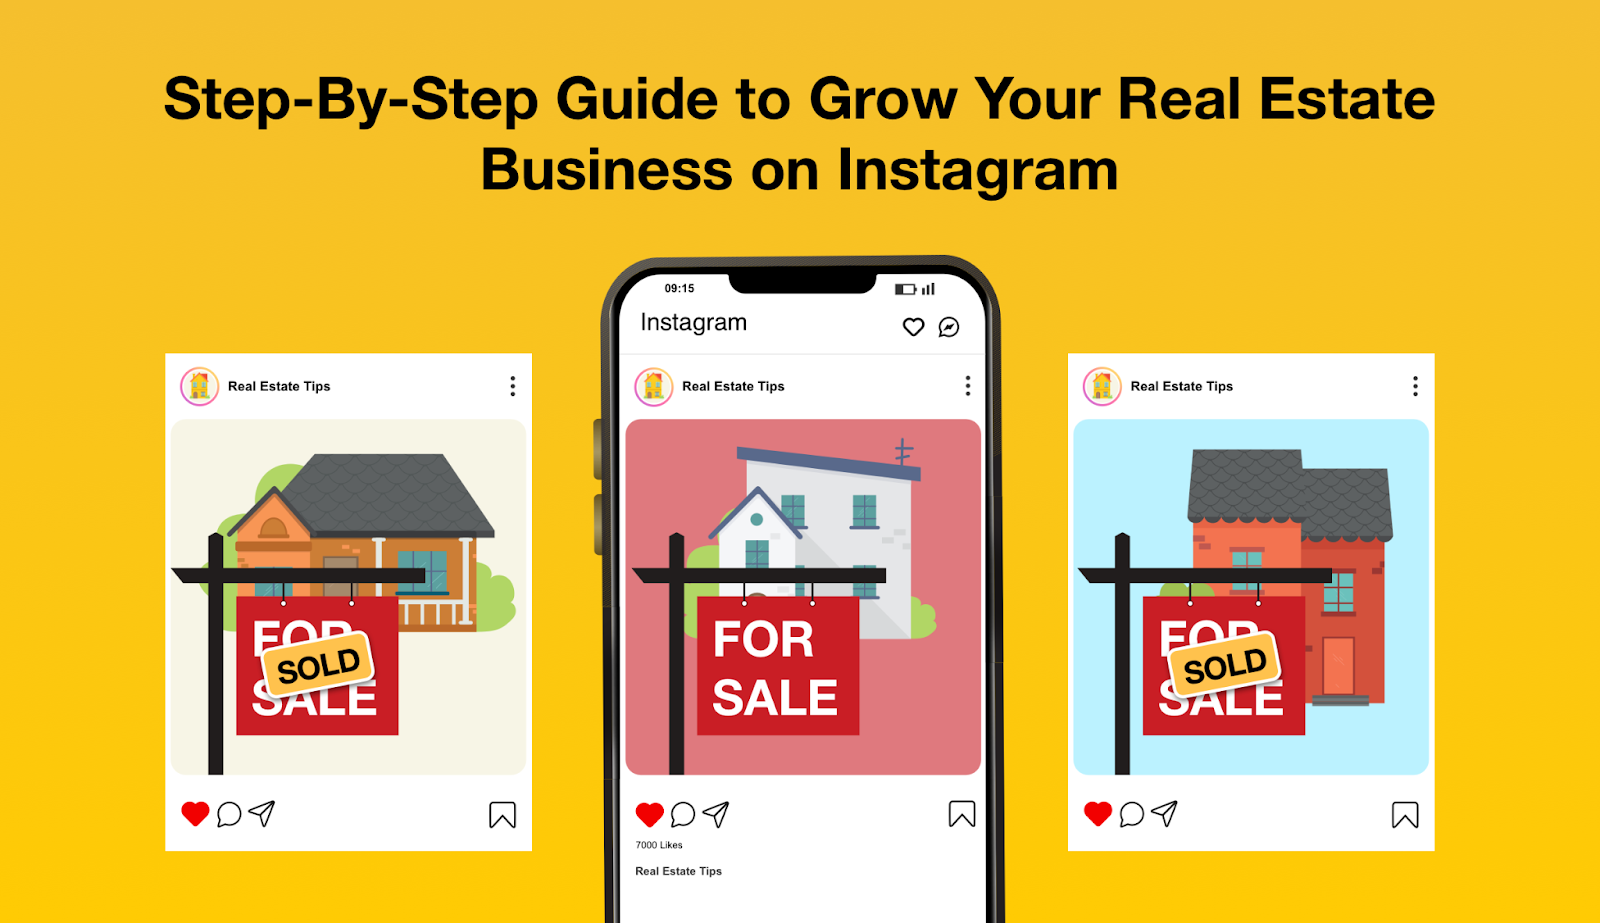 Step-By-Step Guide to Grow Your Real Estate Business on Instagram